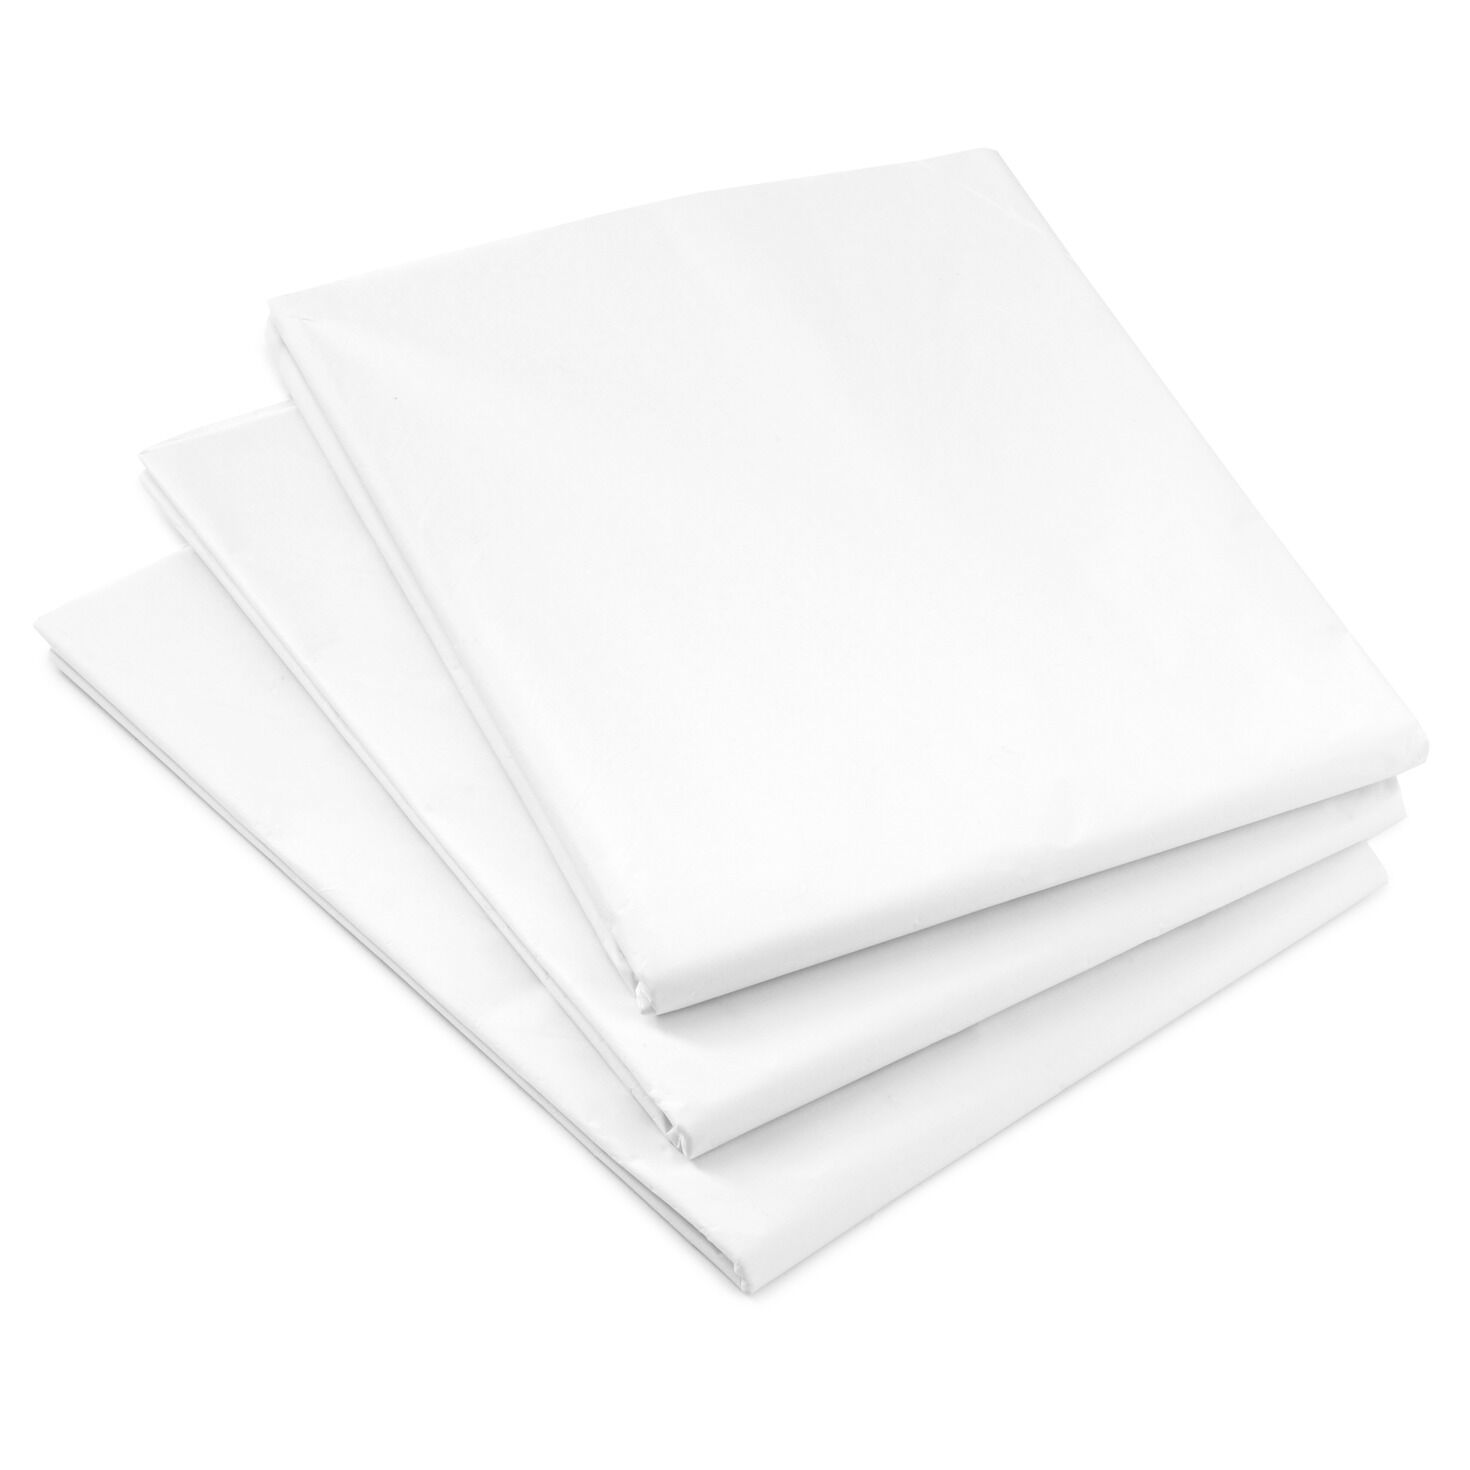 Free Shipping!!! 480 Sheets White Tissue Paper 